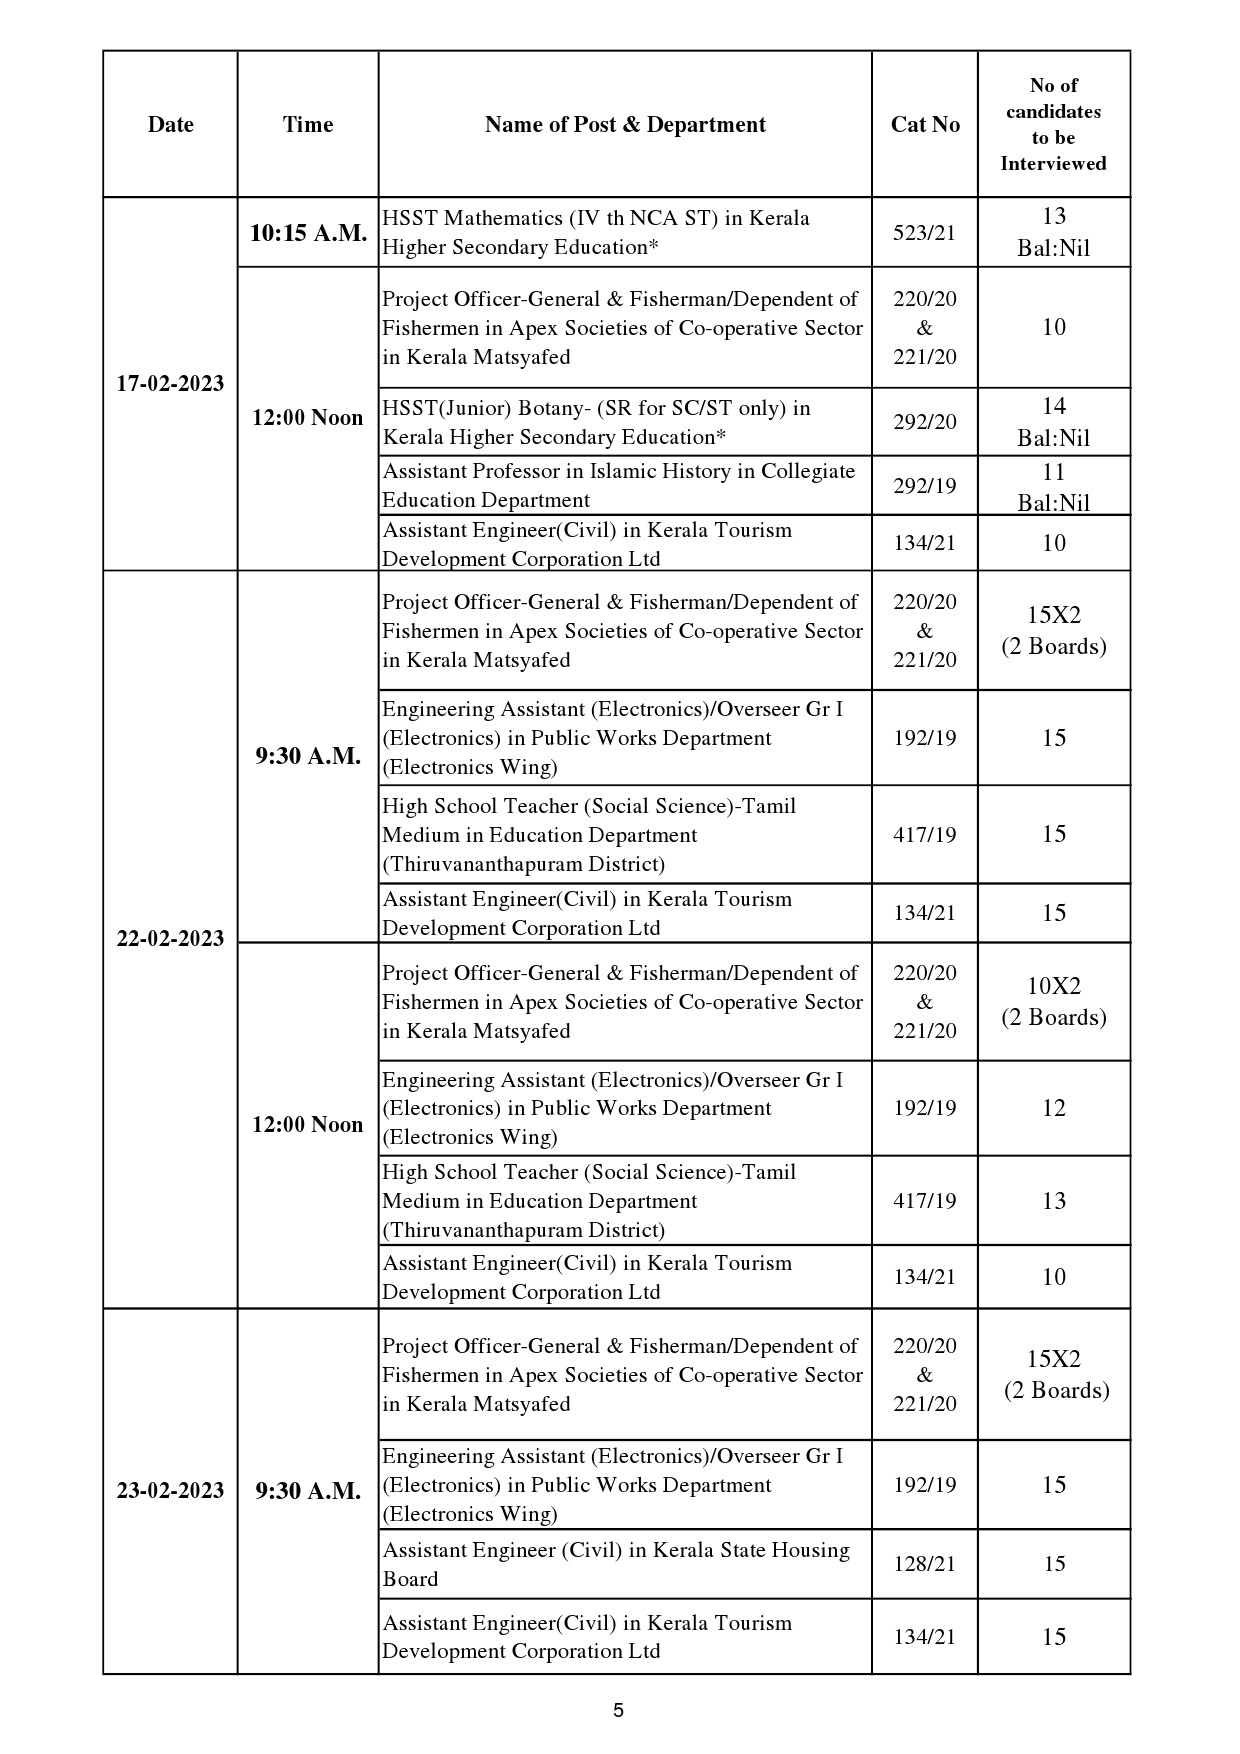 KPSC Revised Interview Programme For February 2023 - Notification Image 5